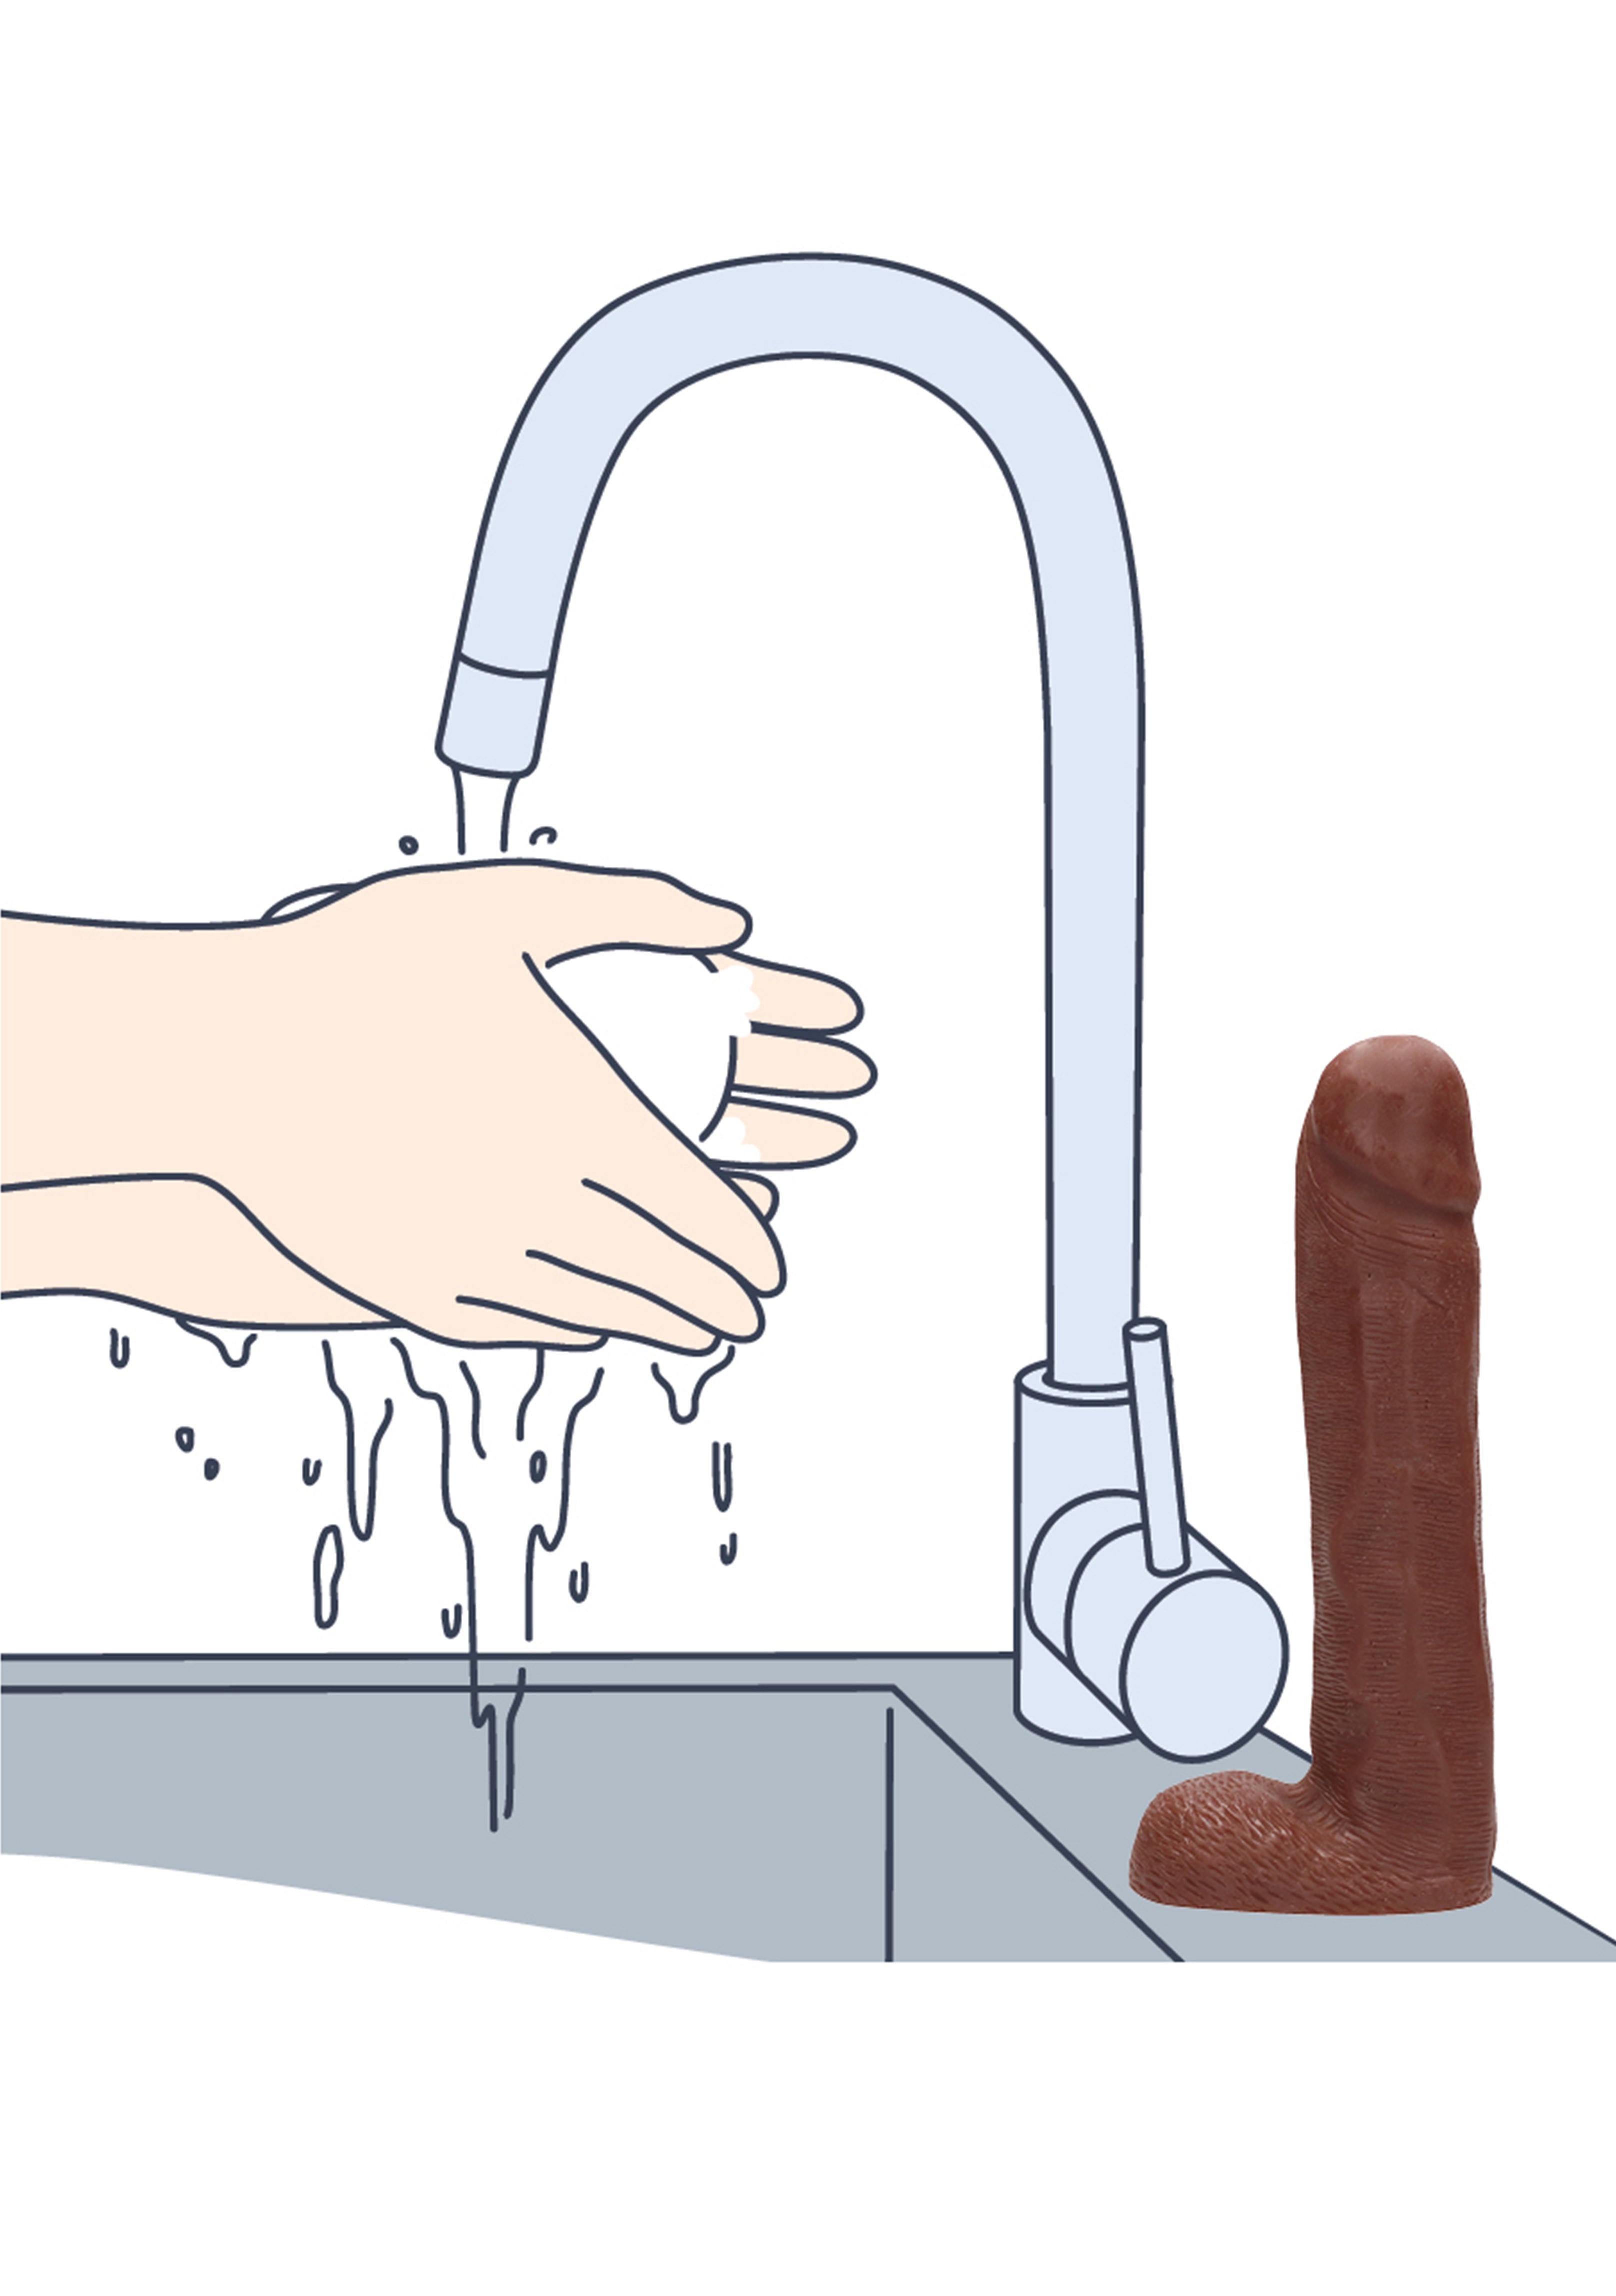 Penis Soap With Balls - Chocolate